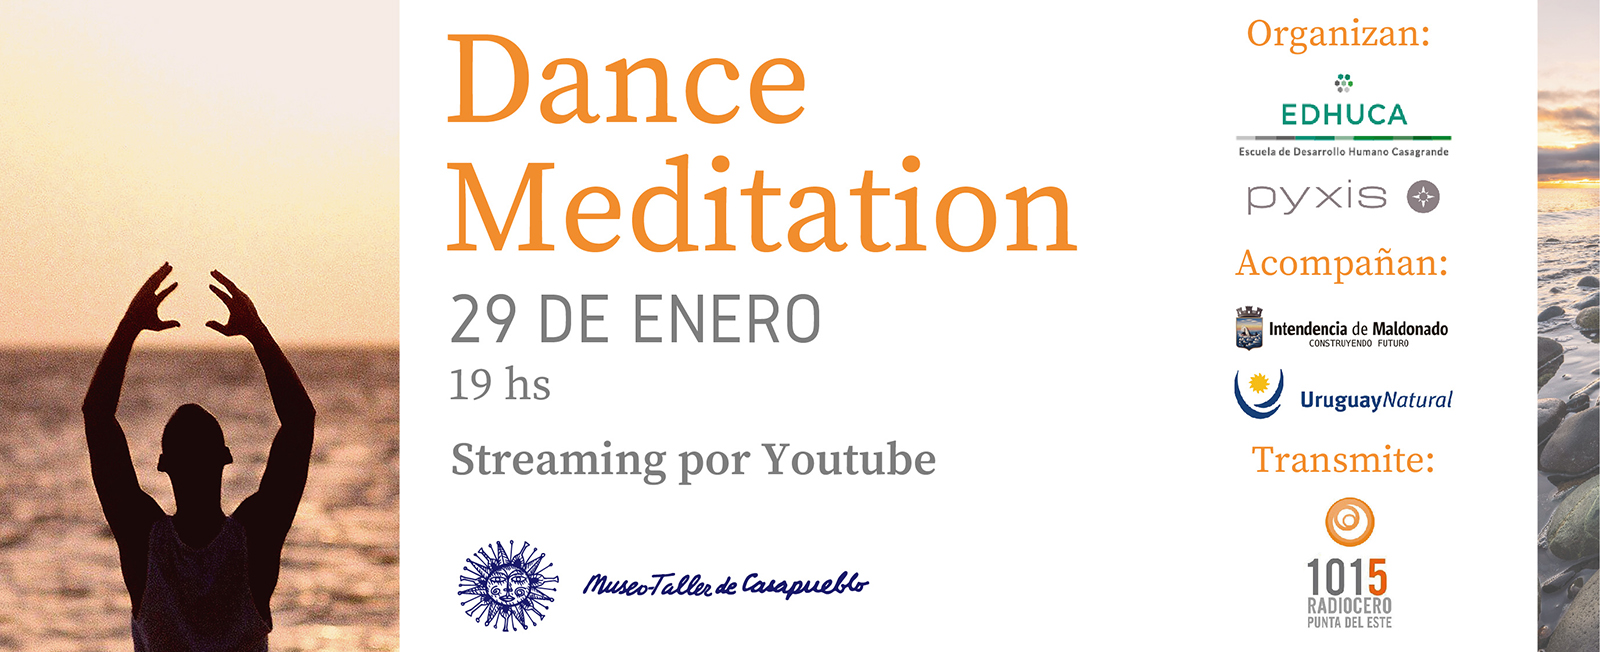 Blog Pyxis - We invite you to participate in the Dance Meditation experience.